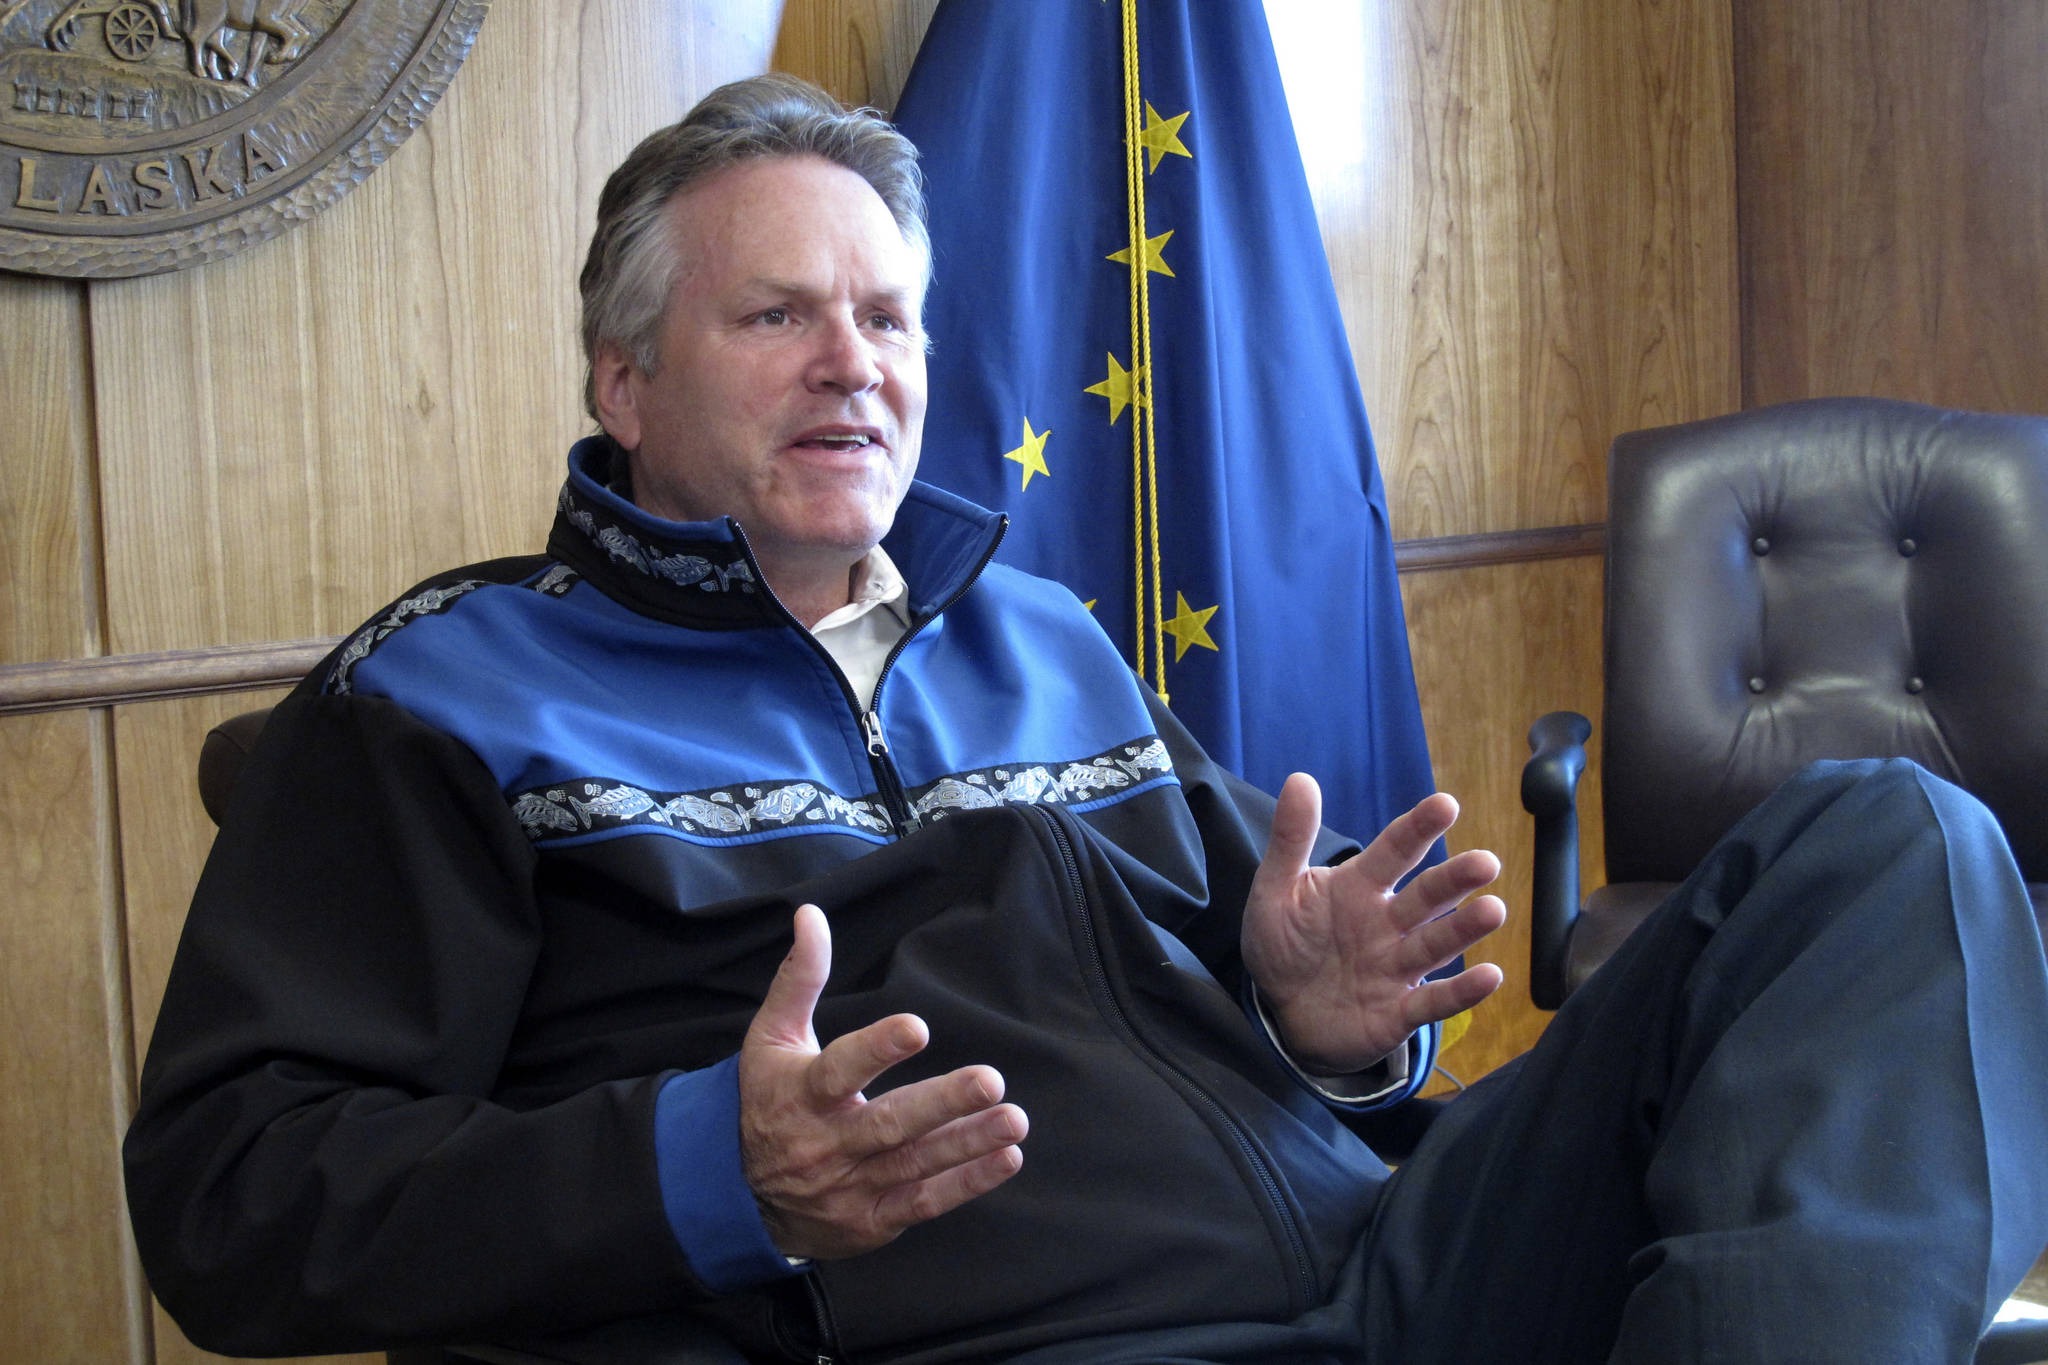 Alaska Gov. Mike Dunleavy gives an interview in the state Capitol on Monday, June 7, 2021, in Juneau, Alaska. The governor urged legislative action on his proposal for the dividend paid to residents from Alaska’s oil-wealth fund. (AP Photo/Becky Bohrer)
Alaska Gov. Mike Dunleavy gives an interview in the state Capitol on Monday, June 7, 2021, in Juneau, Alaska. The governor urged legislative action on his proposal for the dividend paid to residents from Alaska’s oil-wealth fund. (AP Photo/Becky Bohrer)